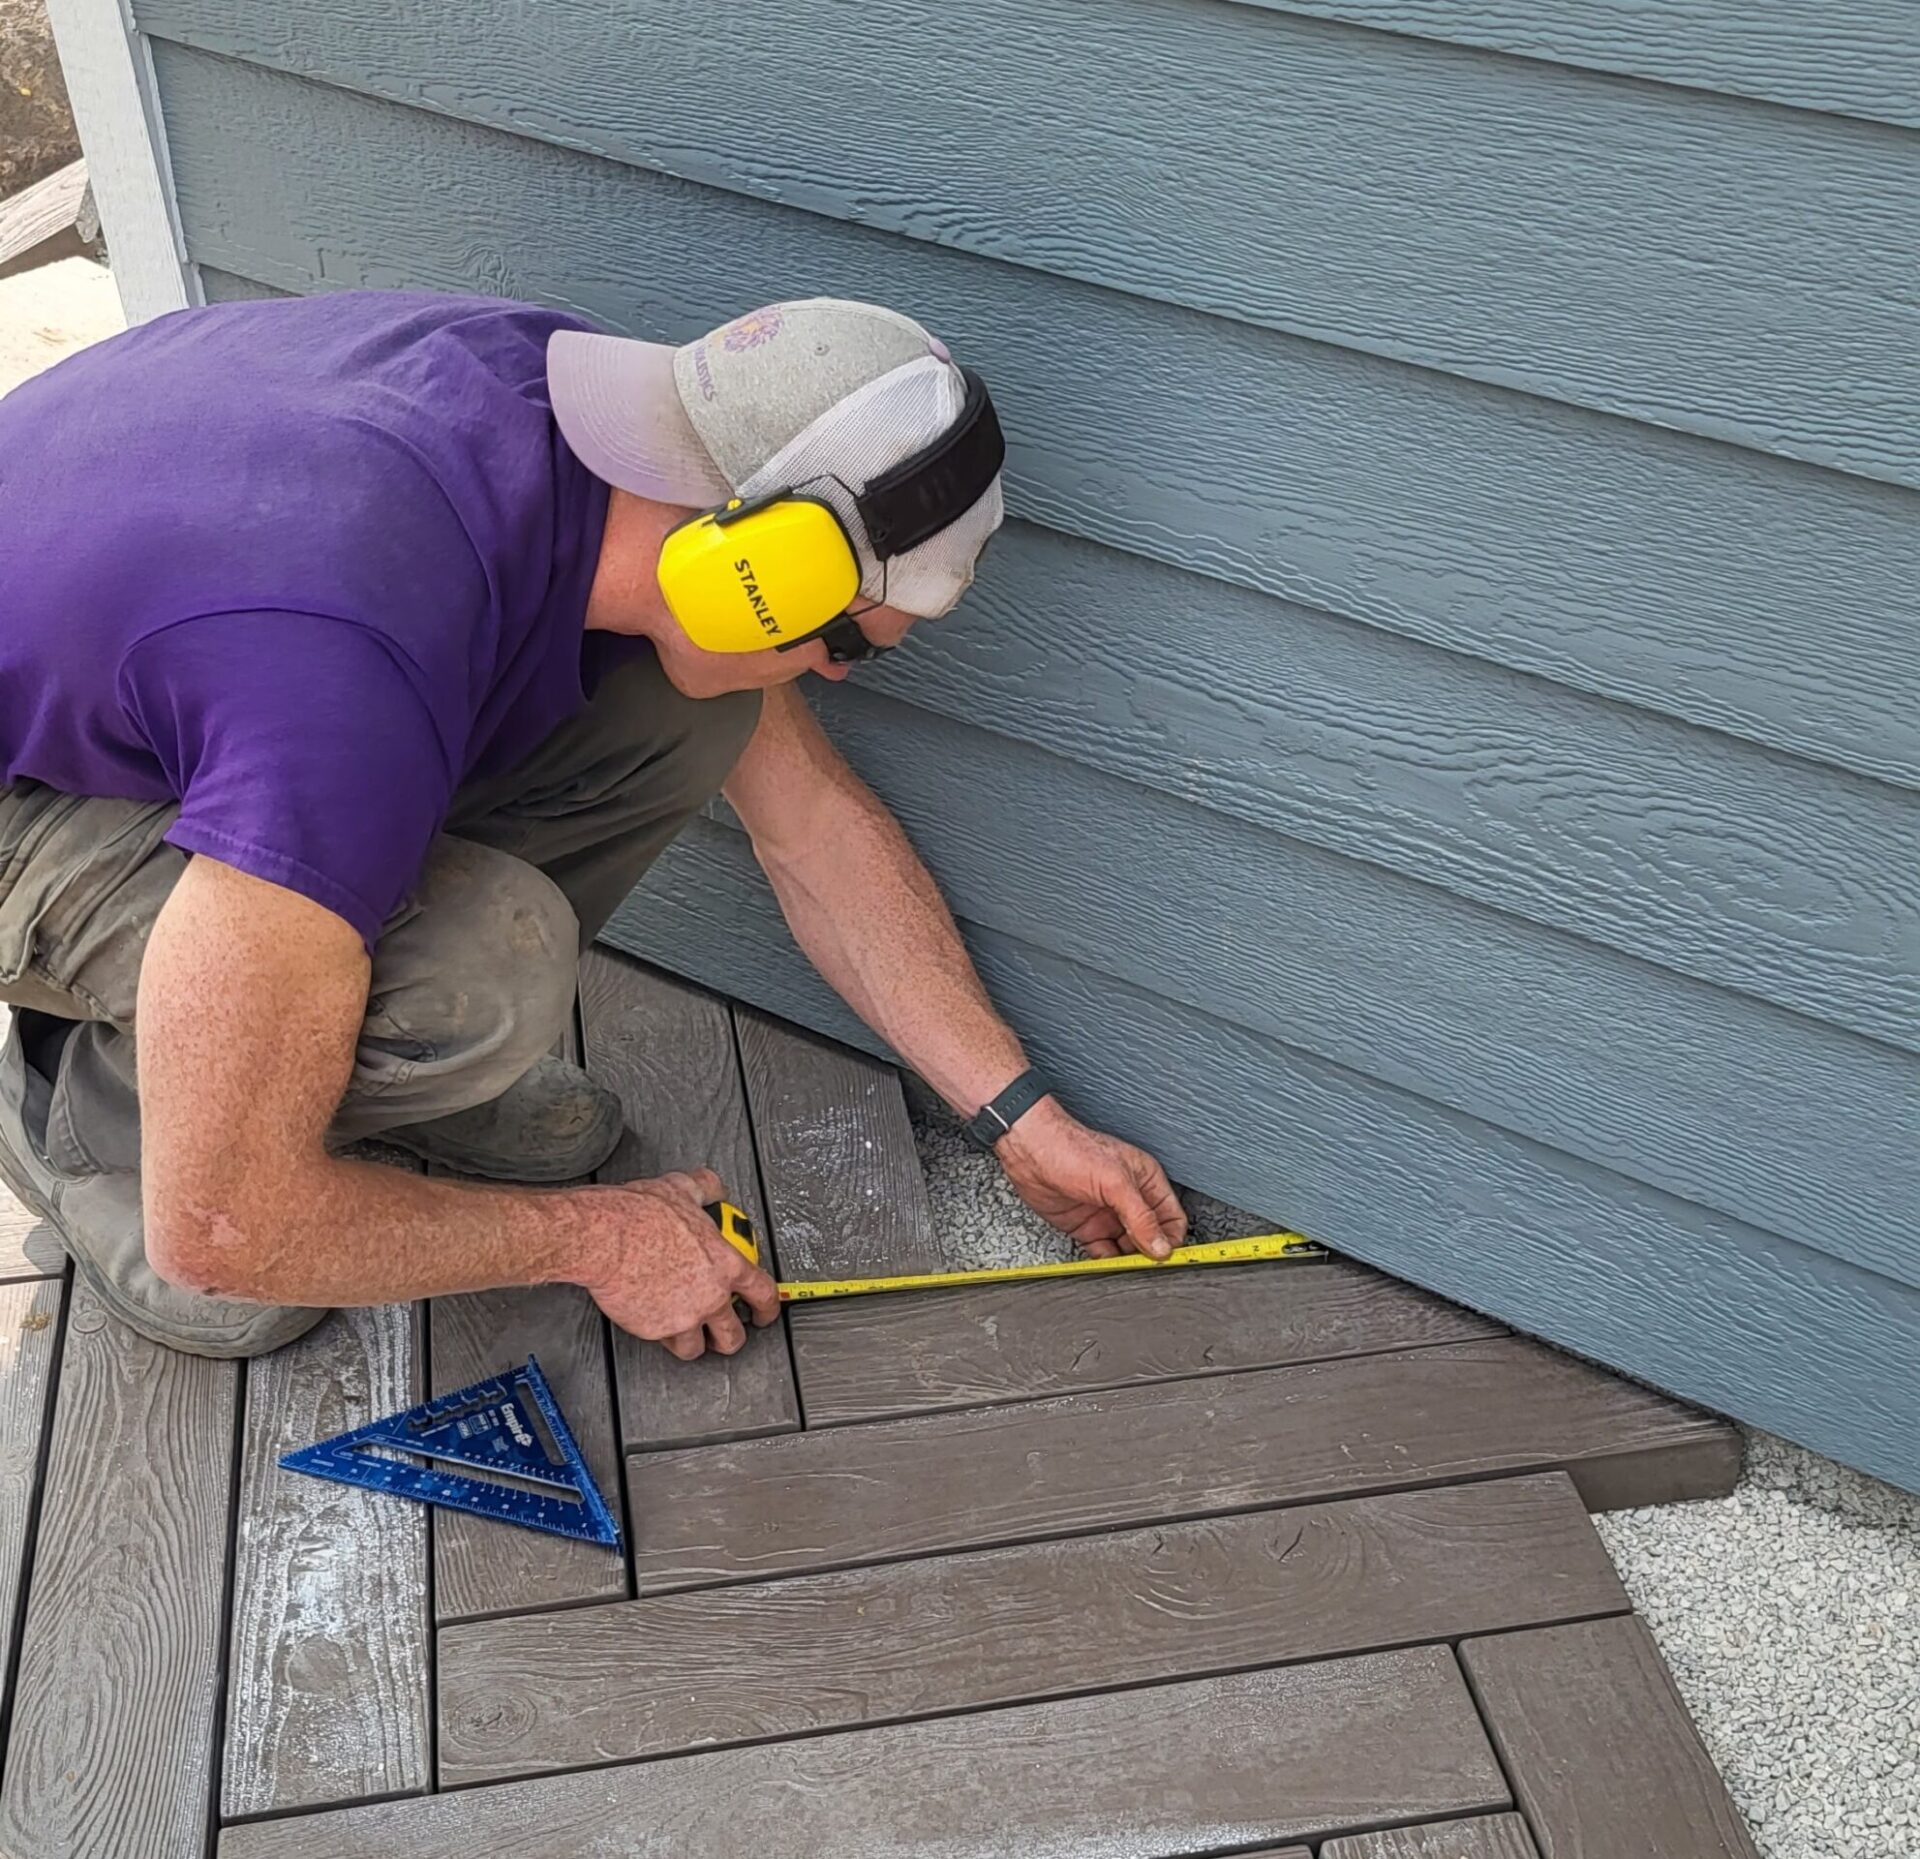 A person is kneeling on a deck, measuring with a tape measure, wearing a purple shirt, cap, and yellow ear protection. A speed square tool is beside them.